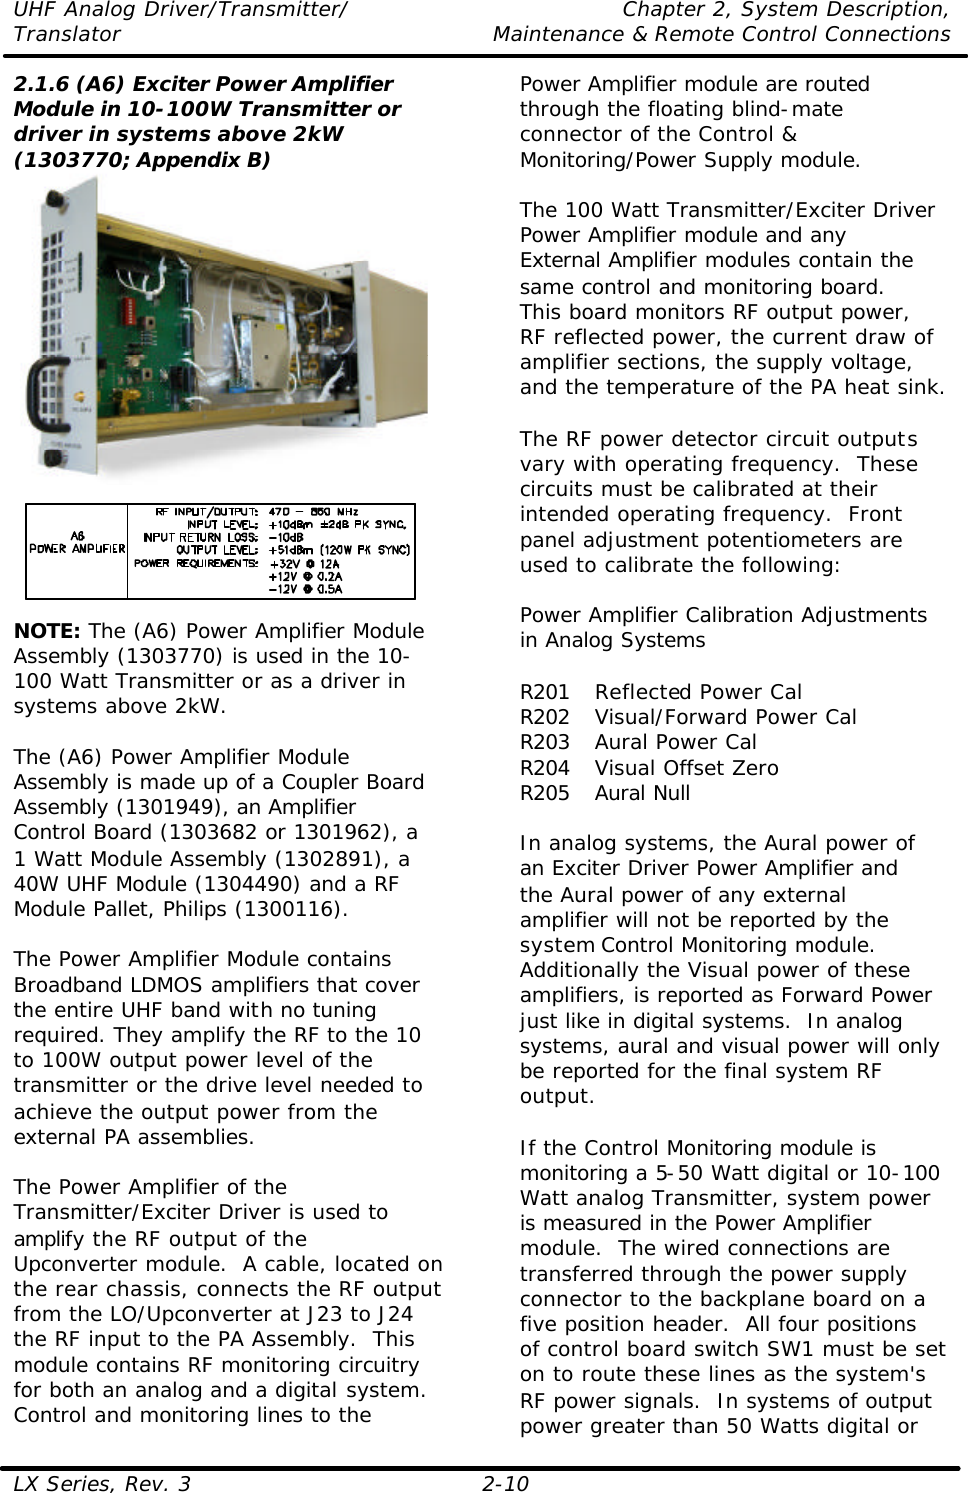 UHF Analog Driver/Transmitter/ Chapter 2, System Description, Translator Maintenance &amp; Remote Control Connections LX Series, Rev. 3 2-10 2.1.6 (A6) Exciter Power Amplifier Module in 10-100W Transmitter or driver in systems above 2kW (1303770; Appendix B)  NOTE: The (A6) Power Amplifier Module Assembly (1303770) is used in the 10-100 Watt Transmitter or as a driver in systems above 2kW.  The (A6) Power Amplifier Module Assembly is made up of a Coupler Board Assembly (1301949), an Amplifier Control Board (1303682 or 1301962), a 1 Watt Module Assembly (1302891), a 40W UHF Module (1304490) and a RF Module Pallet, Philips (1300116).  The Power Amplifier Module contains Broadband LDMOS amplifiers that cover the entire UHF band with no tuning required. They amplify the RF to the 10 to 100W output power level of the transmitter or the drive level needed to achieve the output power from the external PA assemblies.  The Power Amplifier of the Transmitter/Exciter Driver is used to amplify the RF output of the Upconverter module.  A cable, located on the rear chassis, connects the RF output from the LO/Upconverter at J23 to J24 the RF input to the PA Assembly.  This module contains RF monitoring circuitry for both an analog and a digital system.  Control and monitoring lines to the Power Amplifier module are routed through the floating blind-mate connector of the Control &amp; Monitoring/Power Supply module.  The 100 Watt Transmitter/Exciter Driver Power Amplifier module and any External Amplifier modules contain the same control and monitoring board.  This board monitors RF output power, RF reflected power, the current draw of amplifier sections, the supply voltage, and the temperature of the PA heat sink.  The RF power detector circuit outputs vary with operating frequency.  These circuits must be calibrated at their intended operating frequency.  Front panel adjustment potentiometers are used to calibrate the following:  Power Amplifier Calibration Adjustments in Analog Systems  R201 Reflected Power Cal R202 Visual/Forward Power Cal R203 Aural Power Cal R204 Visual Offset Zero R205 Aural Null  In analog systems, the Aural power of an Exciter Driver Power Amplifier and the Aural power of any external amplifier will not be reported by the system Control Monitoring module.  Additionally the Visual power of these amplifiers, is reported as Forward Power just like in digital systems.  In analog systems, aural and visual power will only be reported for the final system RF output.    If the Control Monitoring module is monitoring a 5-50 Watt digital or 10-100 Watt analog Transmitter, system power is measured in the Power Amplifier module.  The wired connections are transferred through the power supply connector to the backplane board on a five position header.  All four positions of control board switch SW1 must be set on to route these lines as the system&apos;s RF power signals.  In systems of output power greater than 50 Watts digital or 